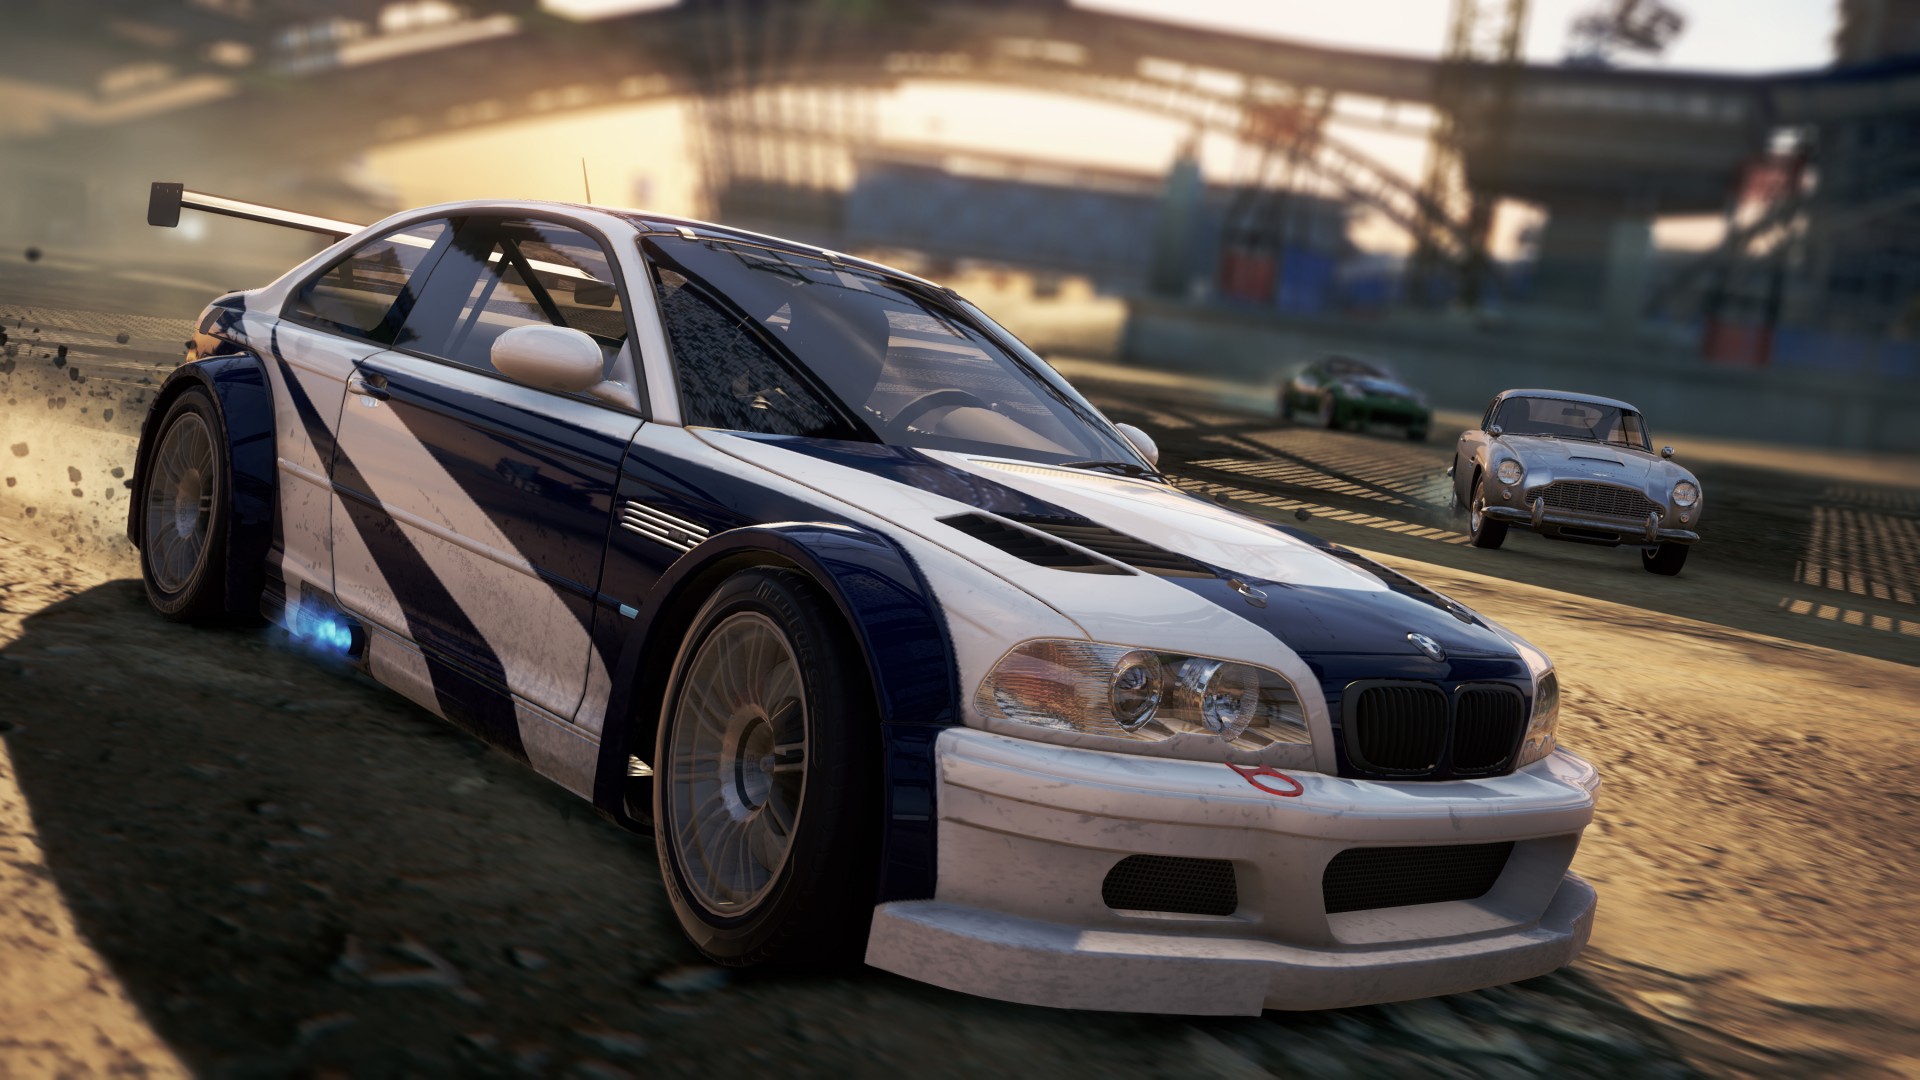 Bmw m3 gtr most wanted real